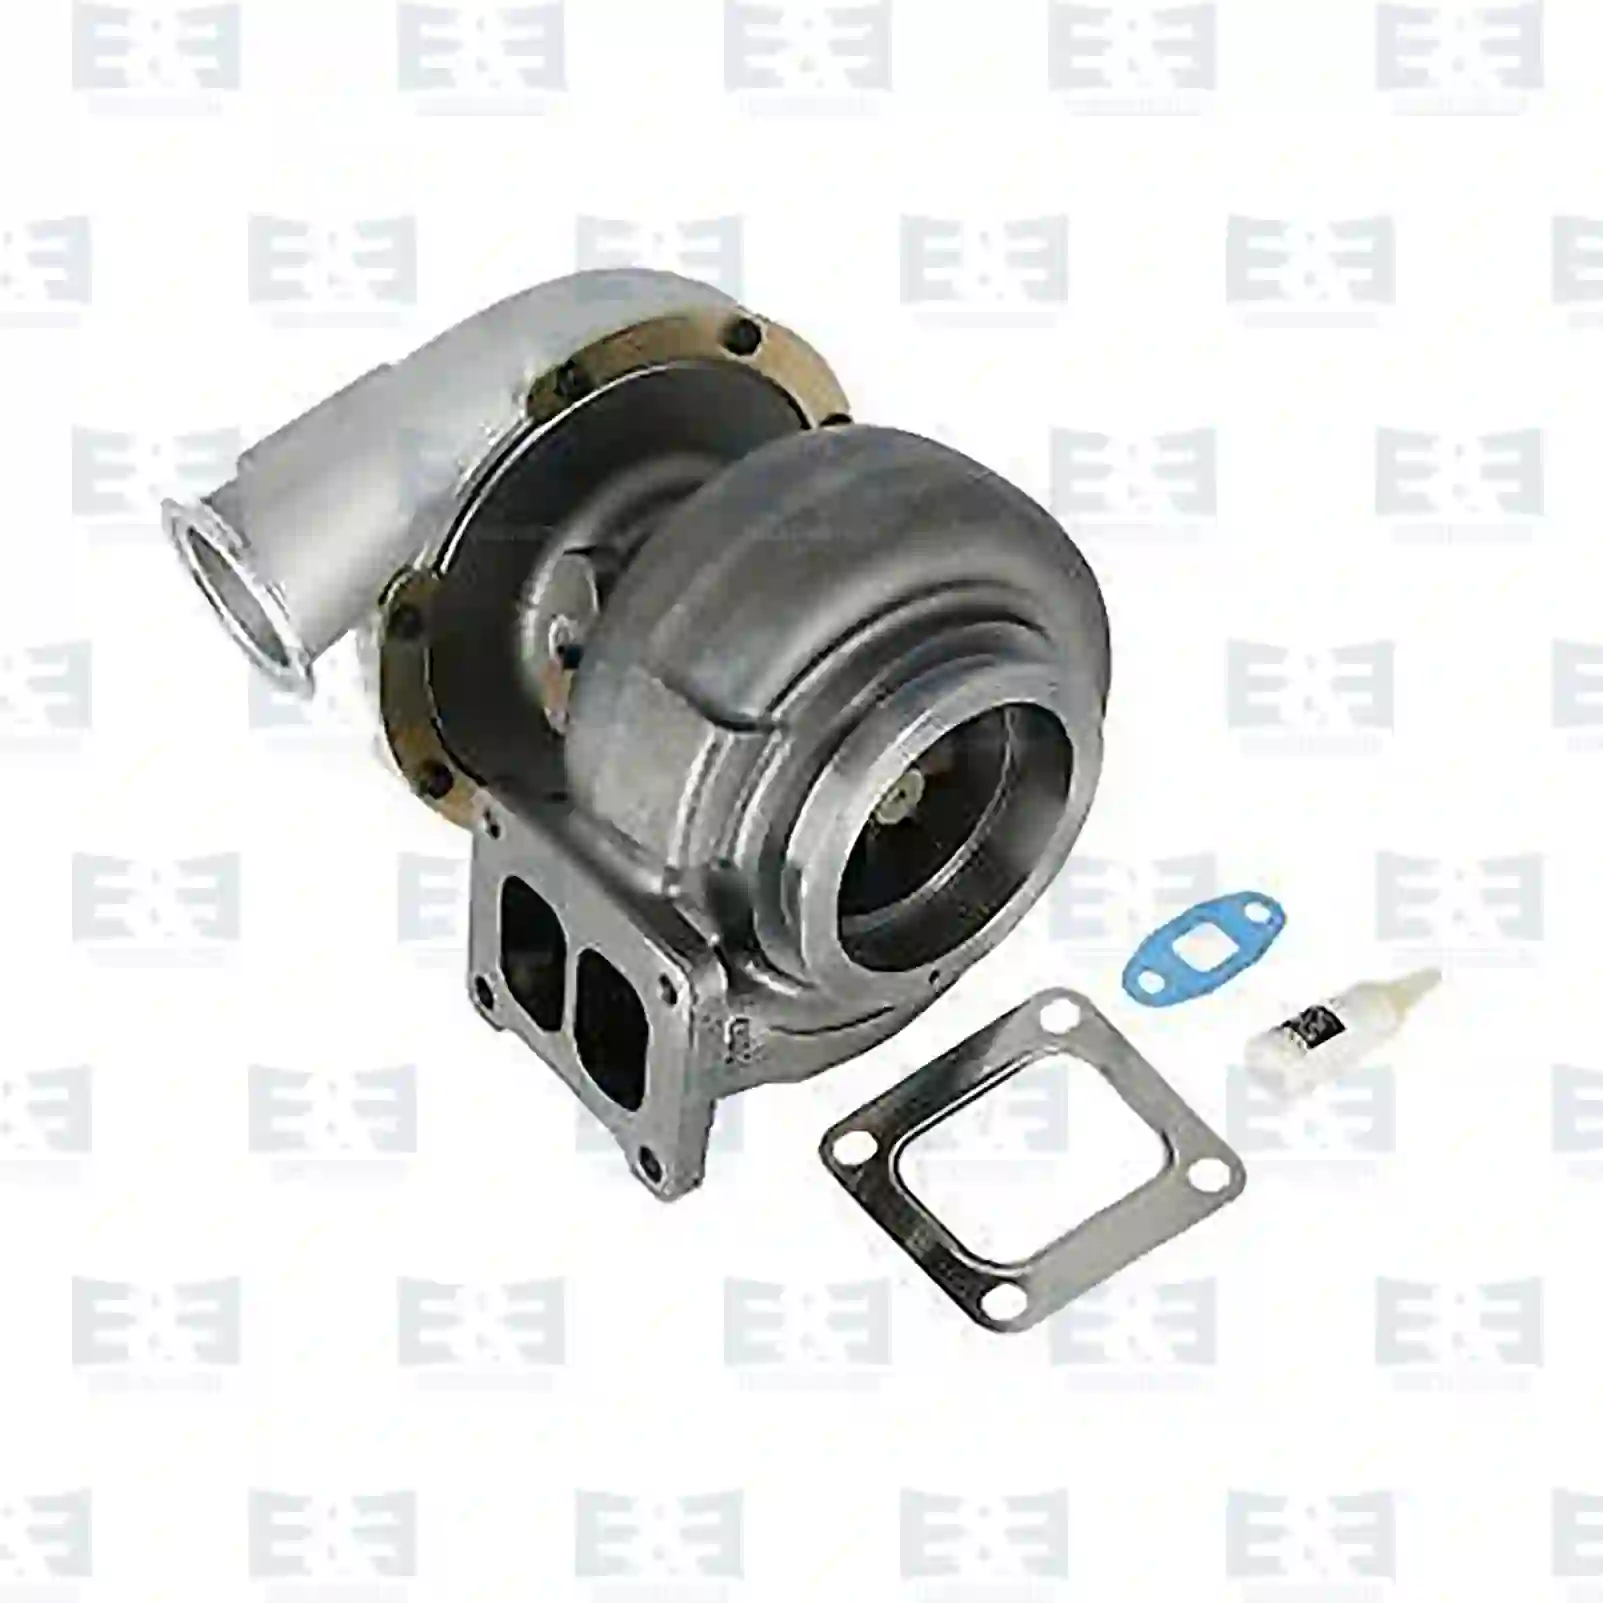 Turbocharger Turbocharger, with gasket kit, EE No 2E2200739 ,  oem no:10570145, 10571482, 10571485, 10571537, 10571548, 10575202, 1354277, 1388058, 1388059, 1395243, 1412299, 1423029, 1423034, 1423038, 1423039, 1423040, 1423041, 1484887, 1485648, 1571482, 1571485, 1571548, 1575202, 1778612, 571482, 571485, 571548, 575202 E&E Truck Spare Parts | Truck Spare Parts, Auotomotive Spare Parts